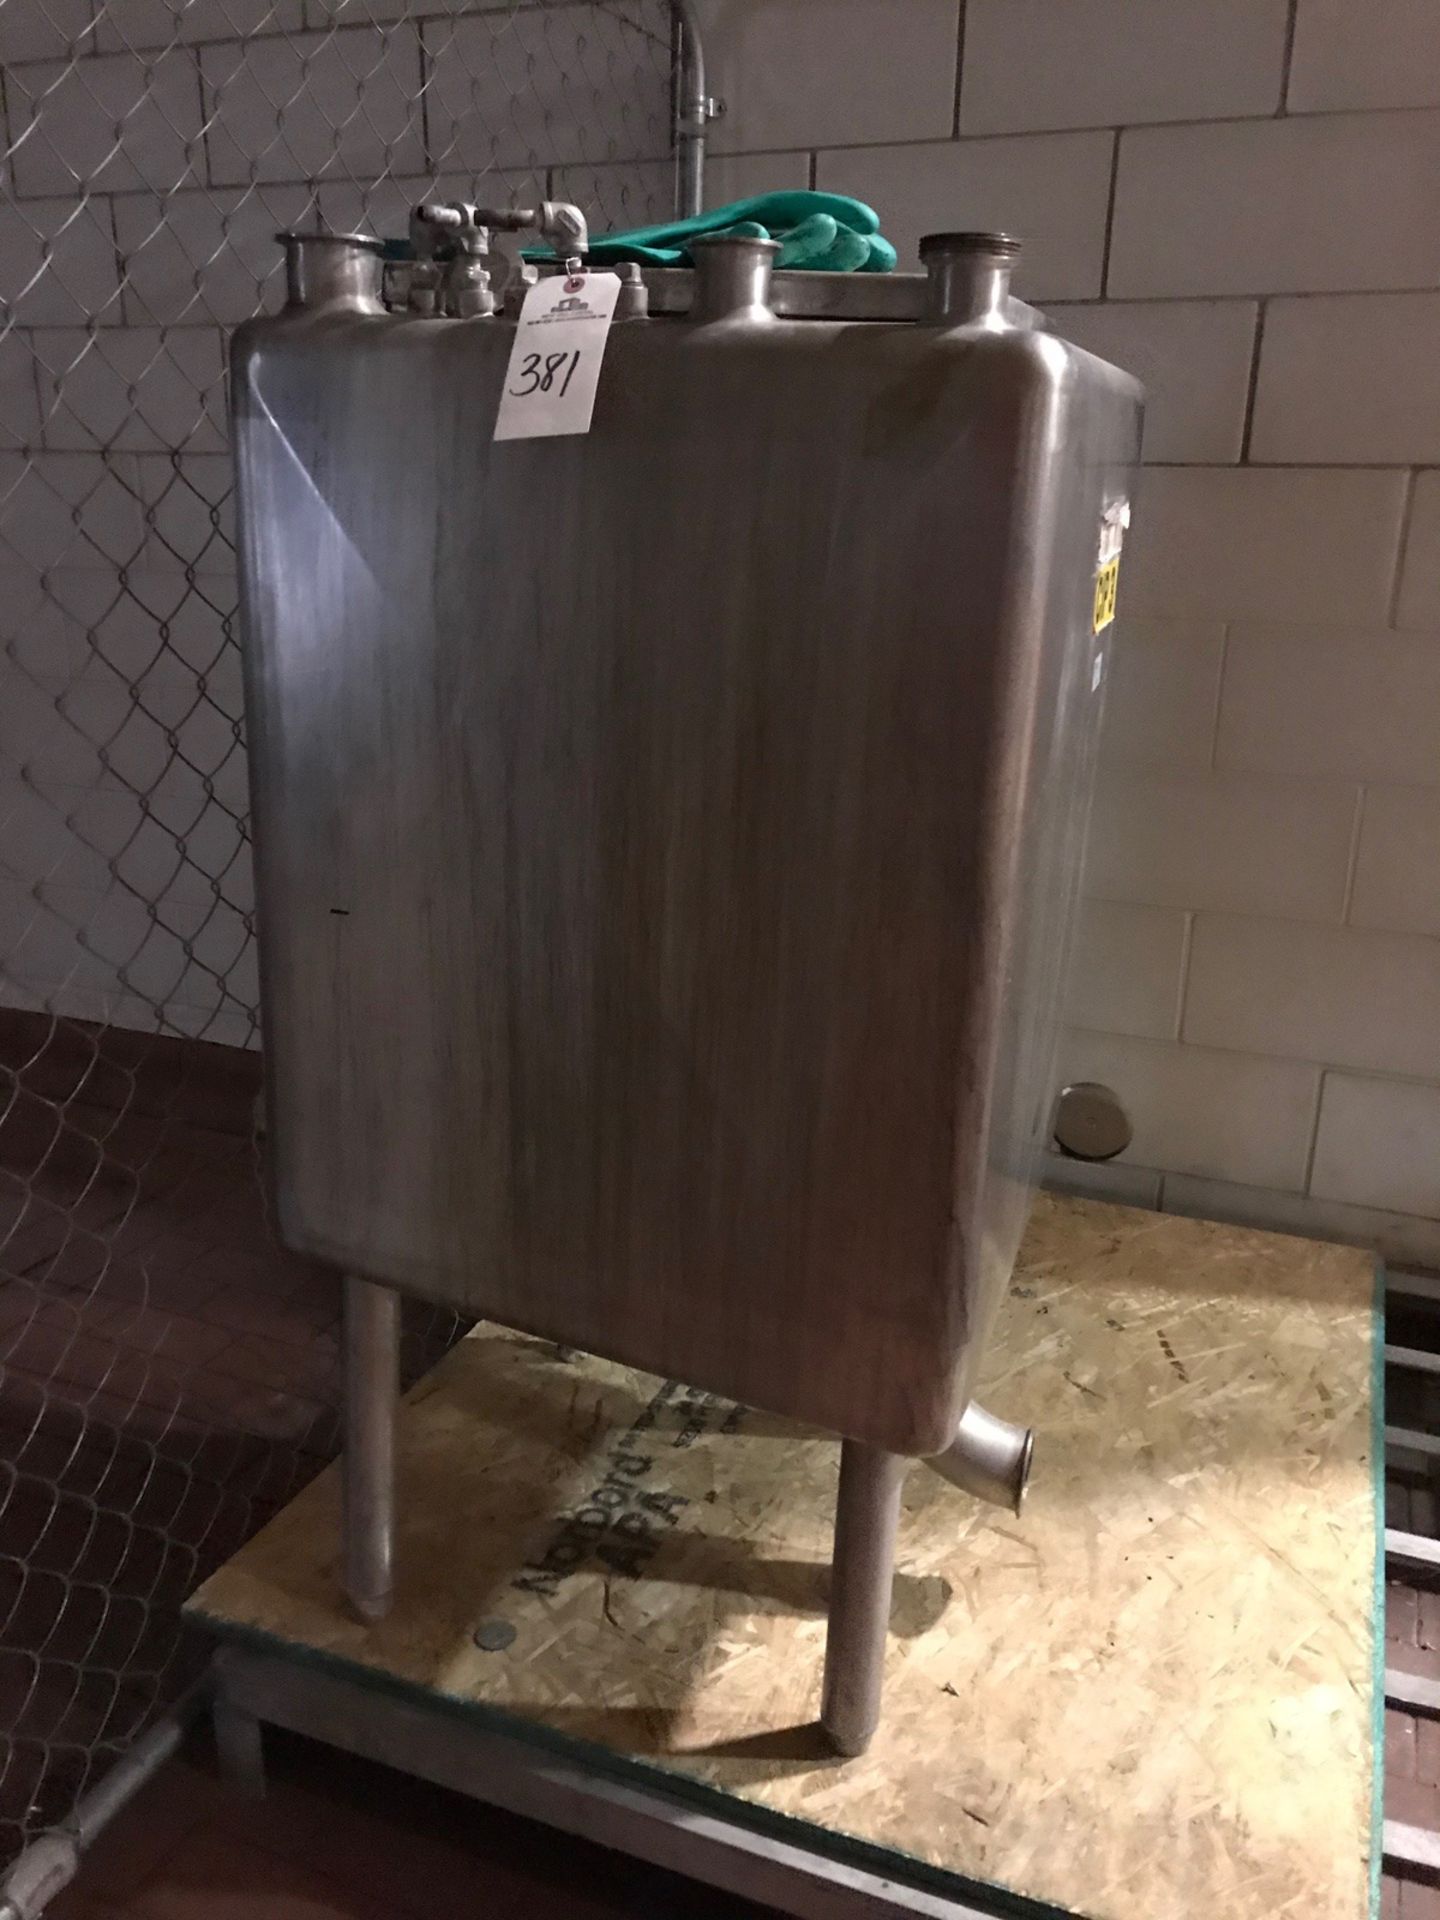 SQUARE CIP TANK, STAINLESS STEEL, APPROXIMATELY 24" X 24" X 30" DEEP | Rig Fee $50